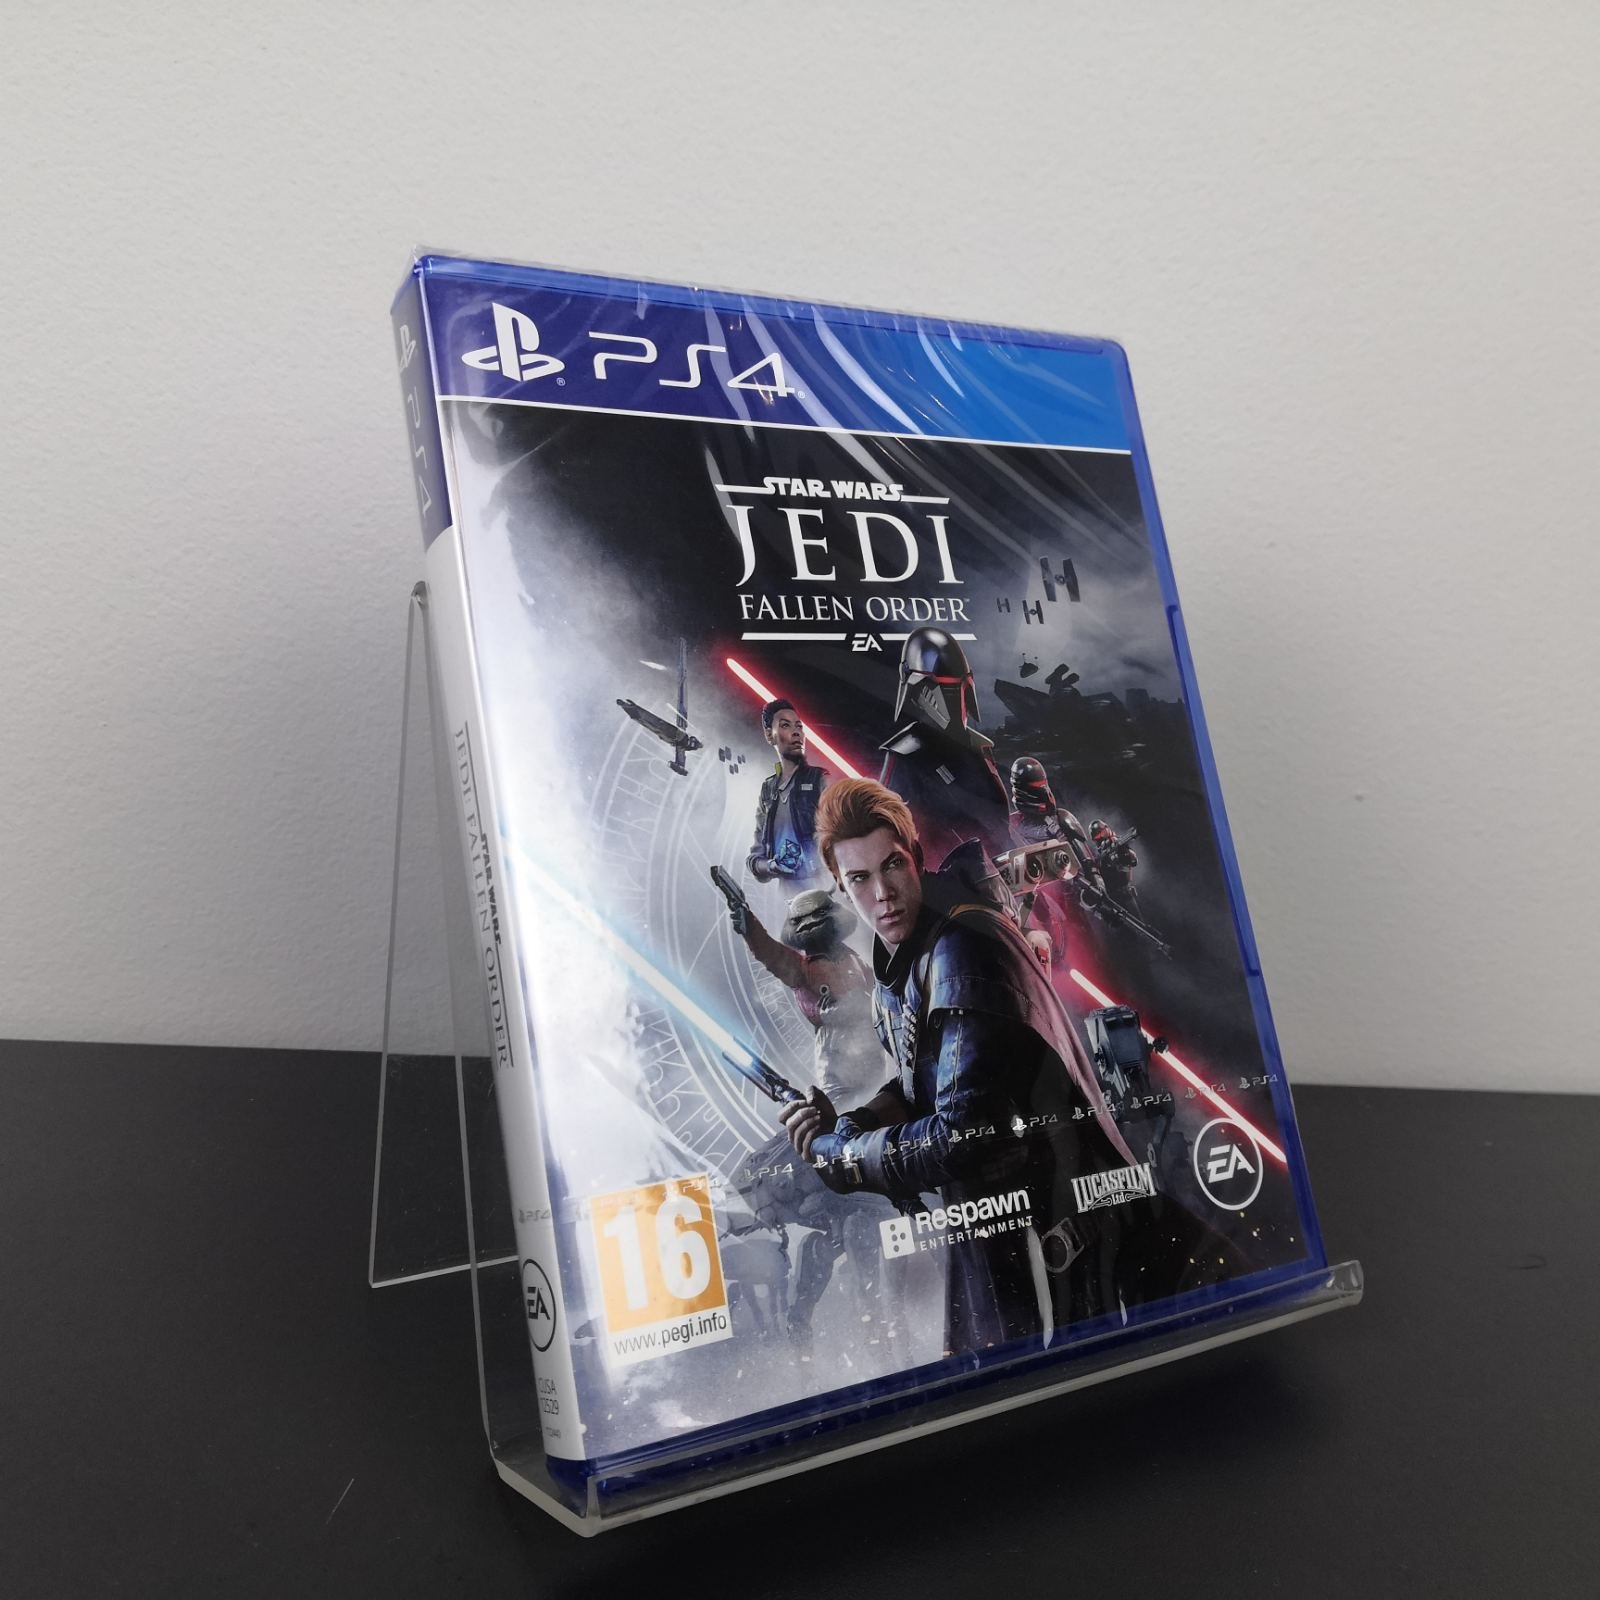 I have PS4 Star Wars Jedi Fallen Order game for sell